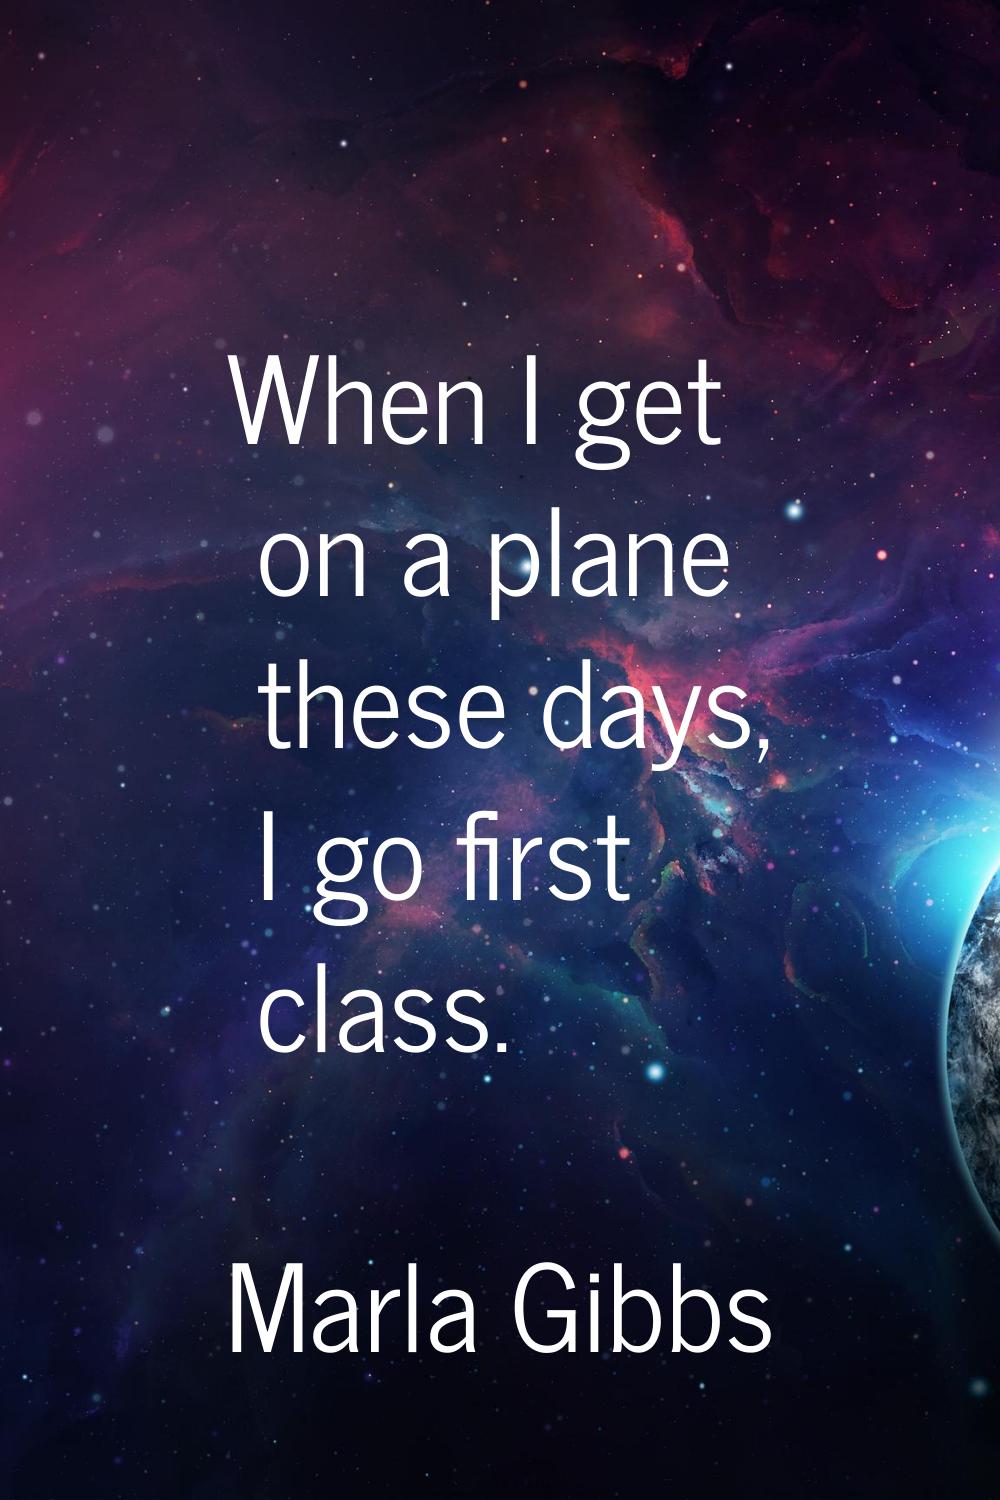 When I get on a plane these days, I go first class.